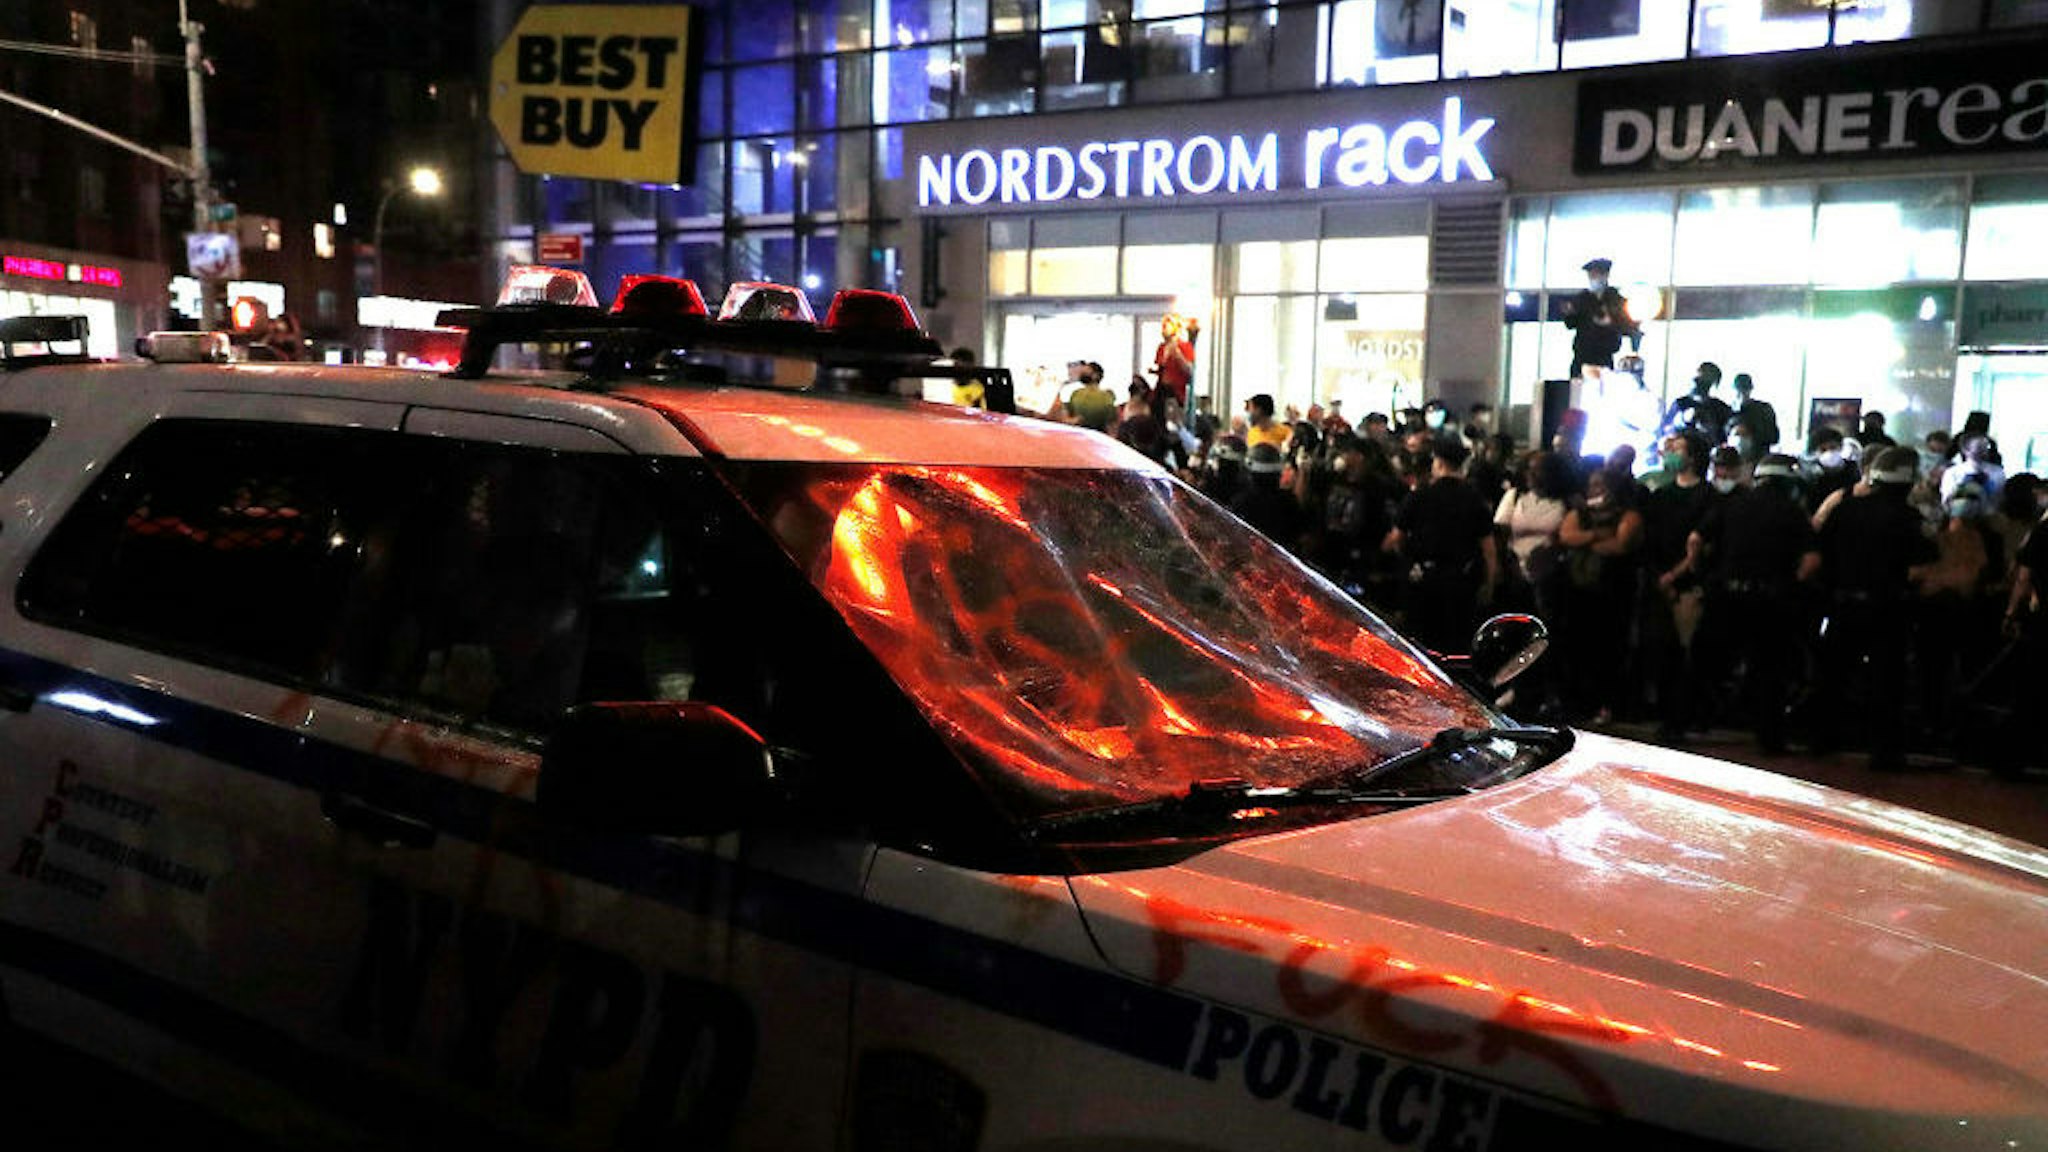 A police car with smashed wind shield is seen in UnionSquare during a demonstration in response to the death of a Minneapolis man George Floyd on May 29, 2020 in New York City. The video that captured the death of George Floyd implicated the arresting officers sparking days of riots in Minneapolis Minnesota. Governor Tim Waltzs attempt to quell the violence and looting by calling in the National Guard, failed to enforce the curfew. (Photo by John Lamparski/NurPhoto via Getty Images)